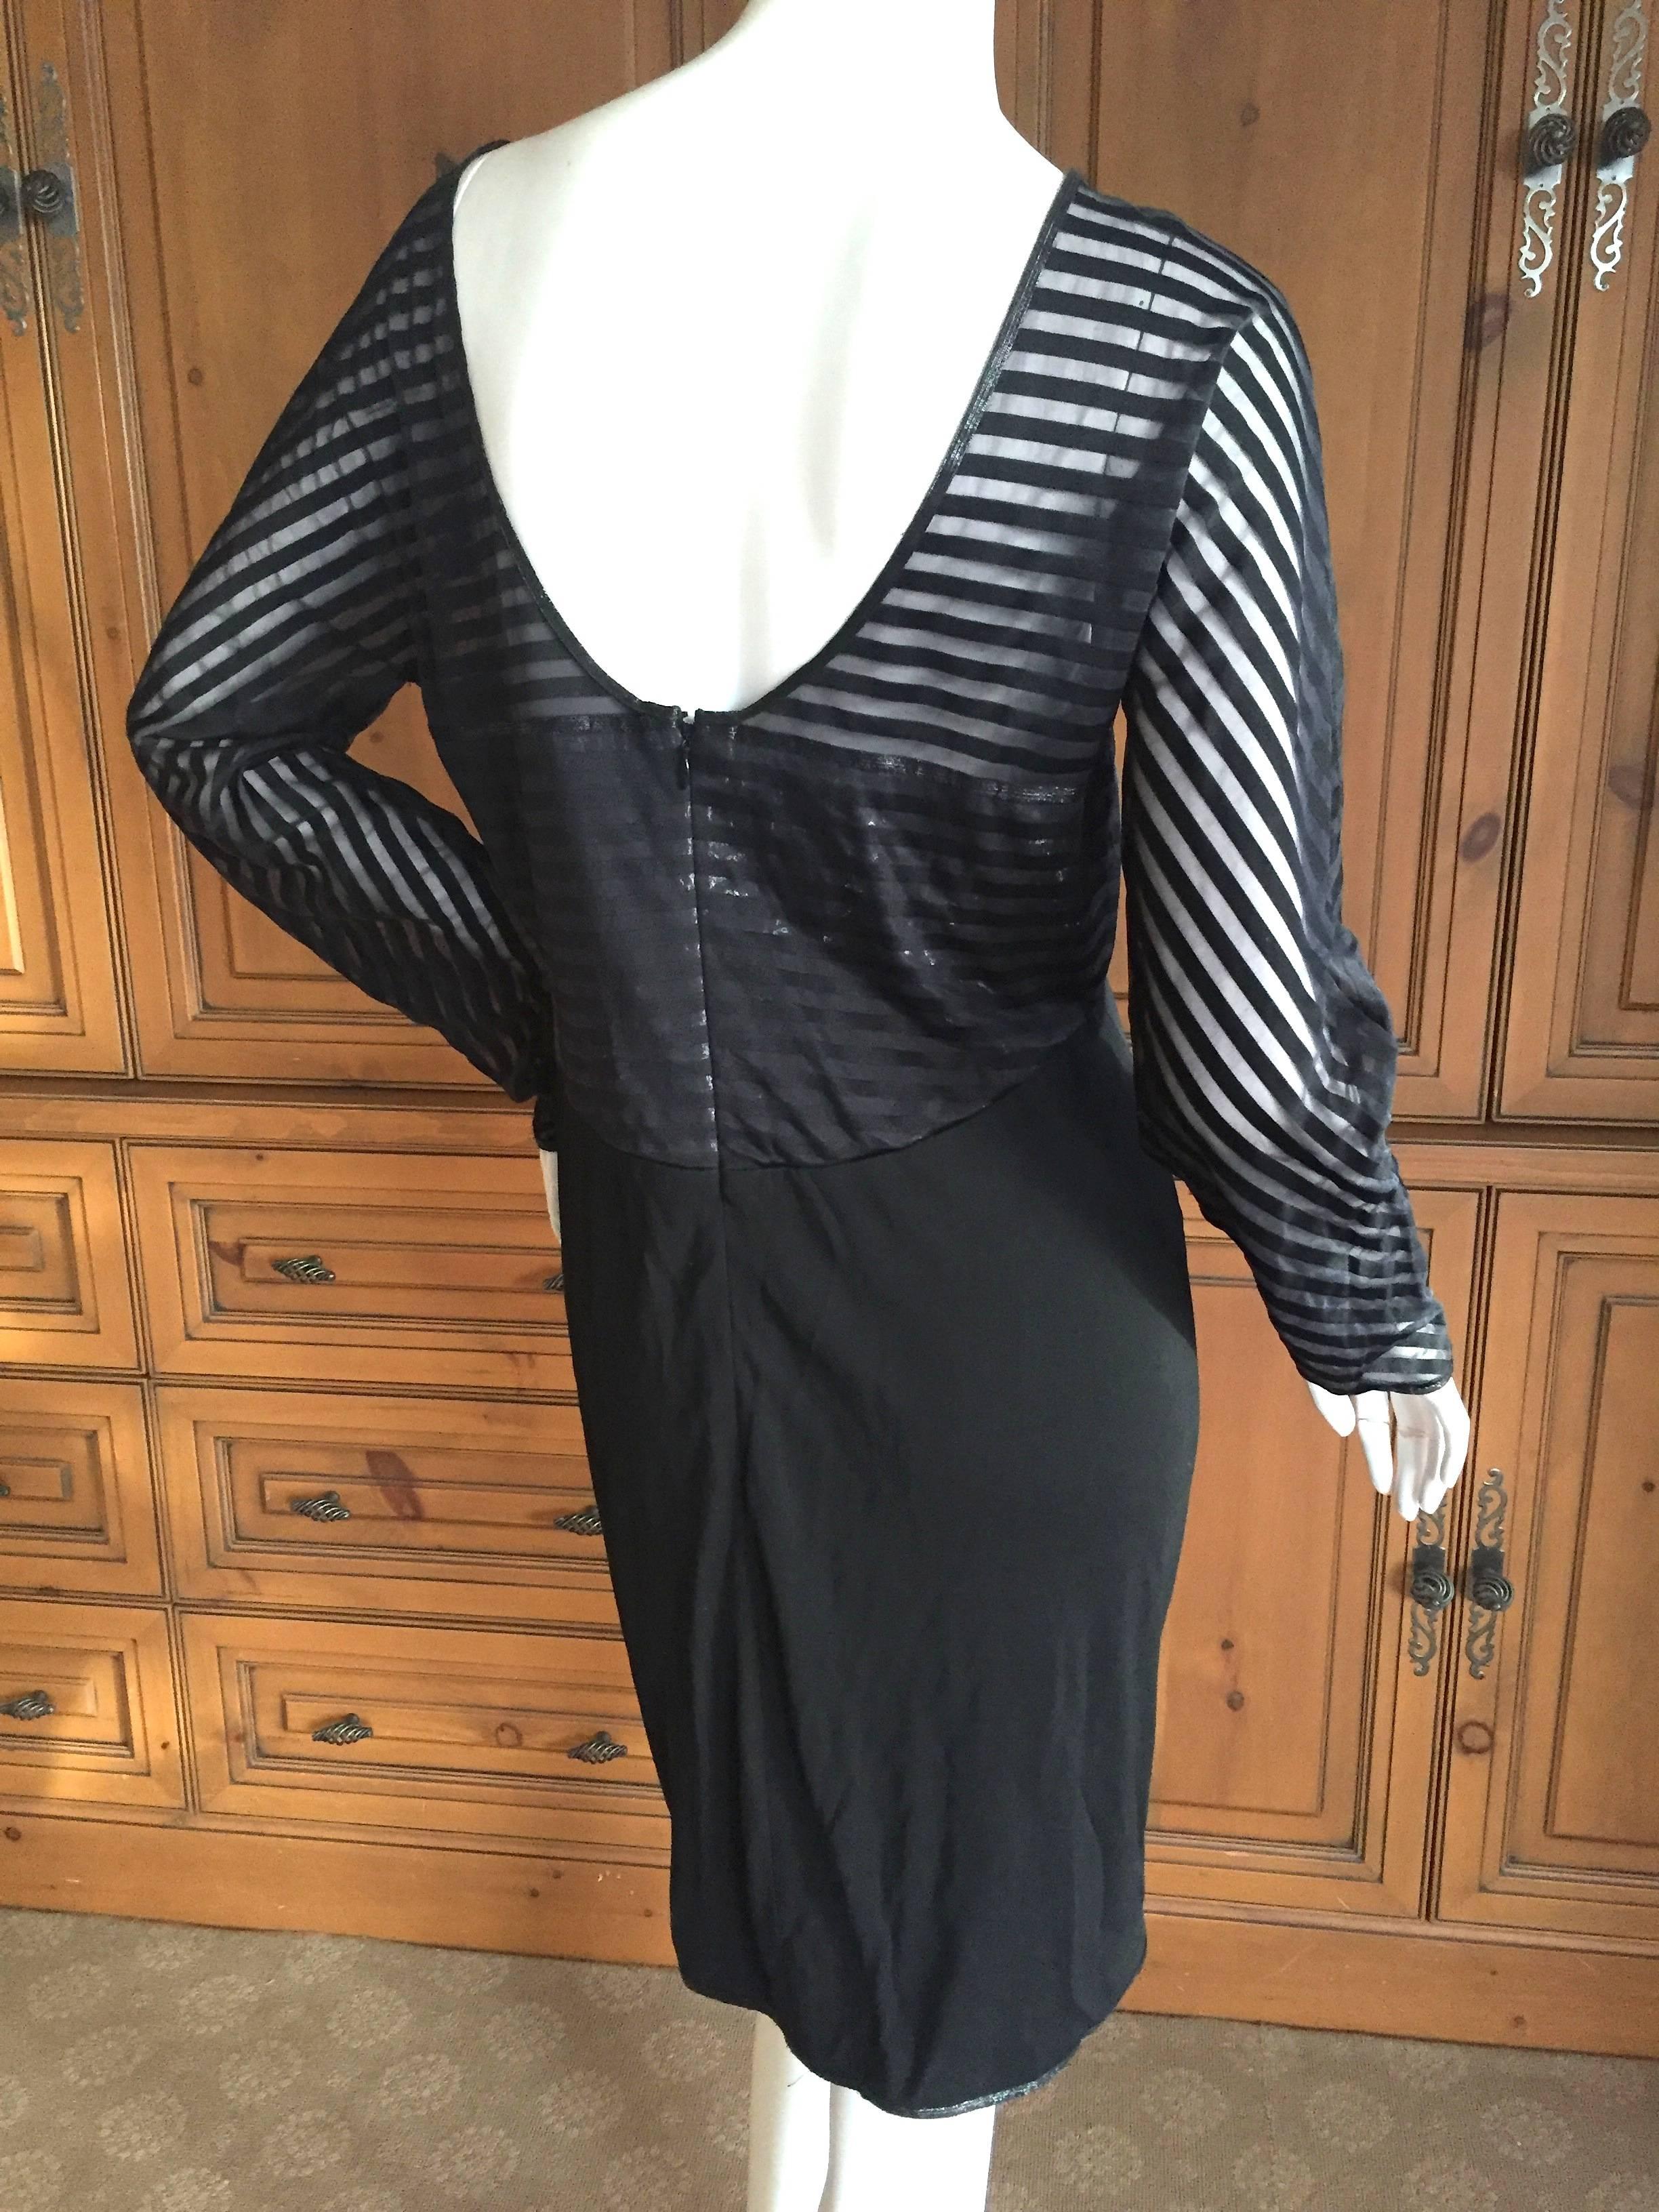 Geoffrey Beene Sheer Stripe Scoop Back Mini Dress.
This is so sweet, the bottom is opaque, the middle is semi sheer, and the top is sheer stripe.
There is a shining strip along the hem.
Much prettier in person, didn't photograph well.
Bust